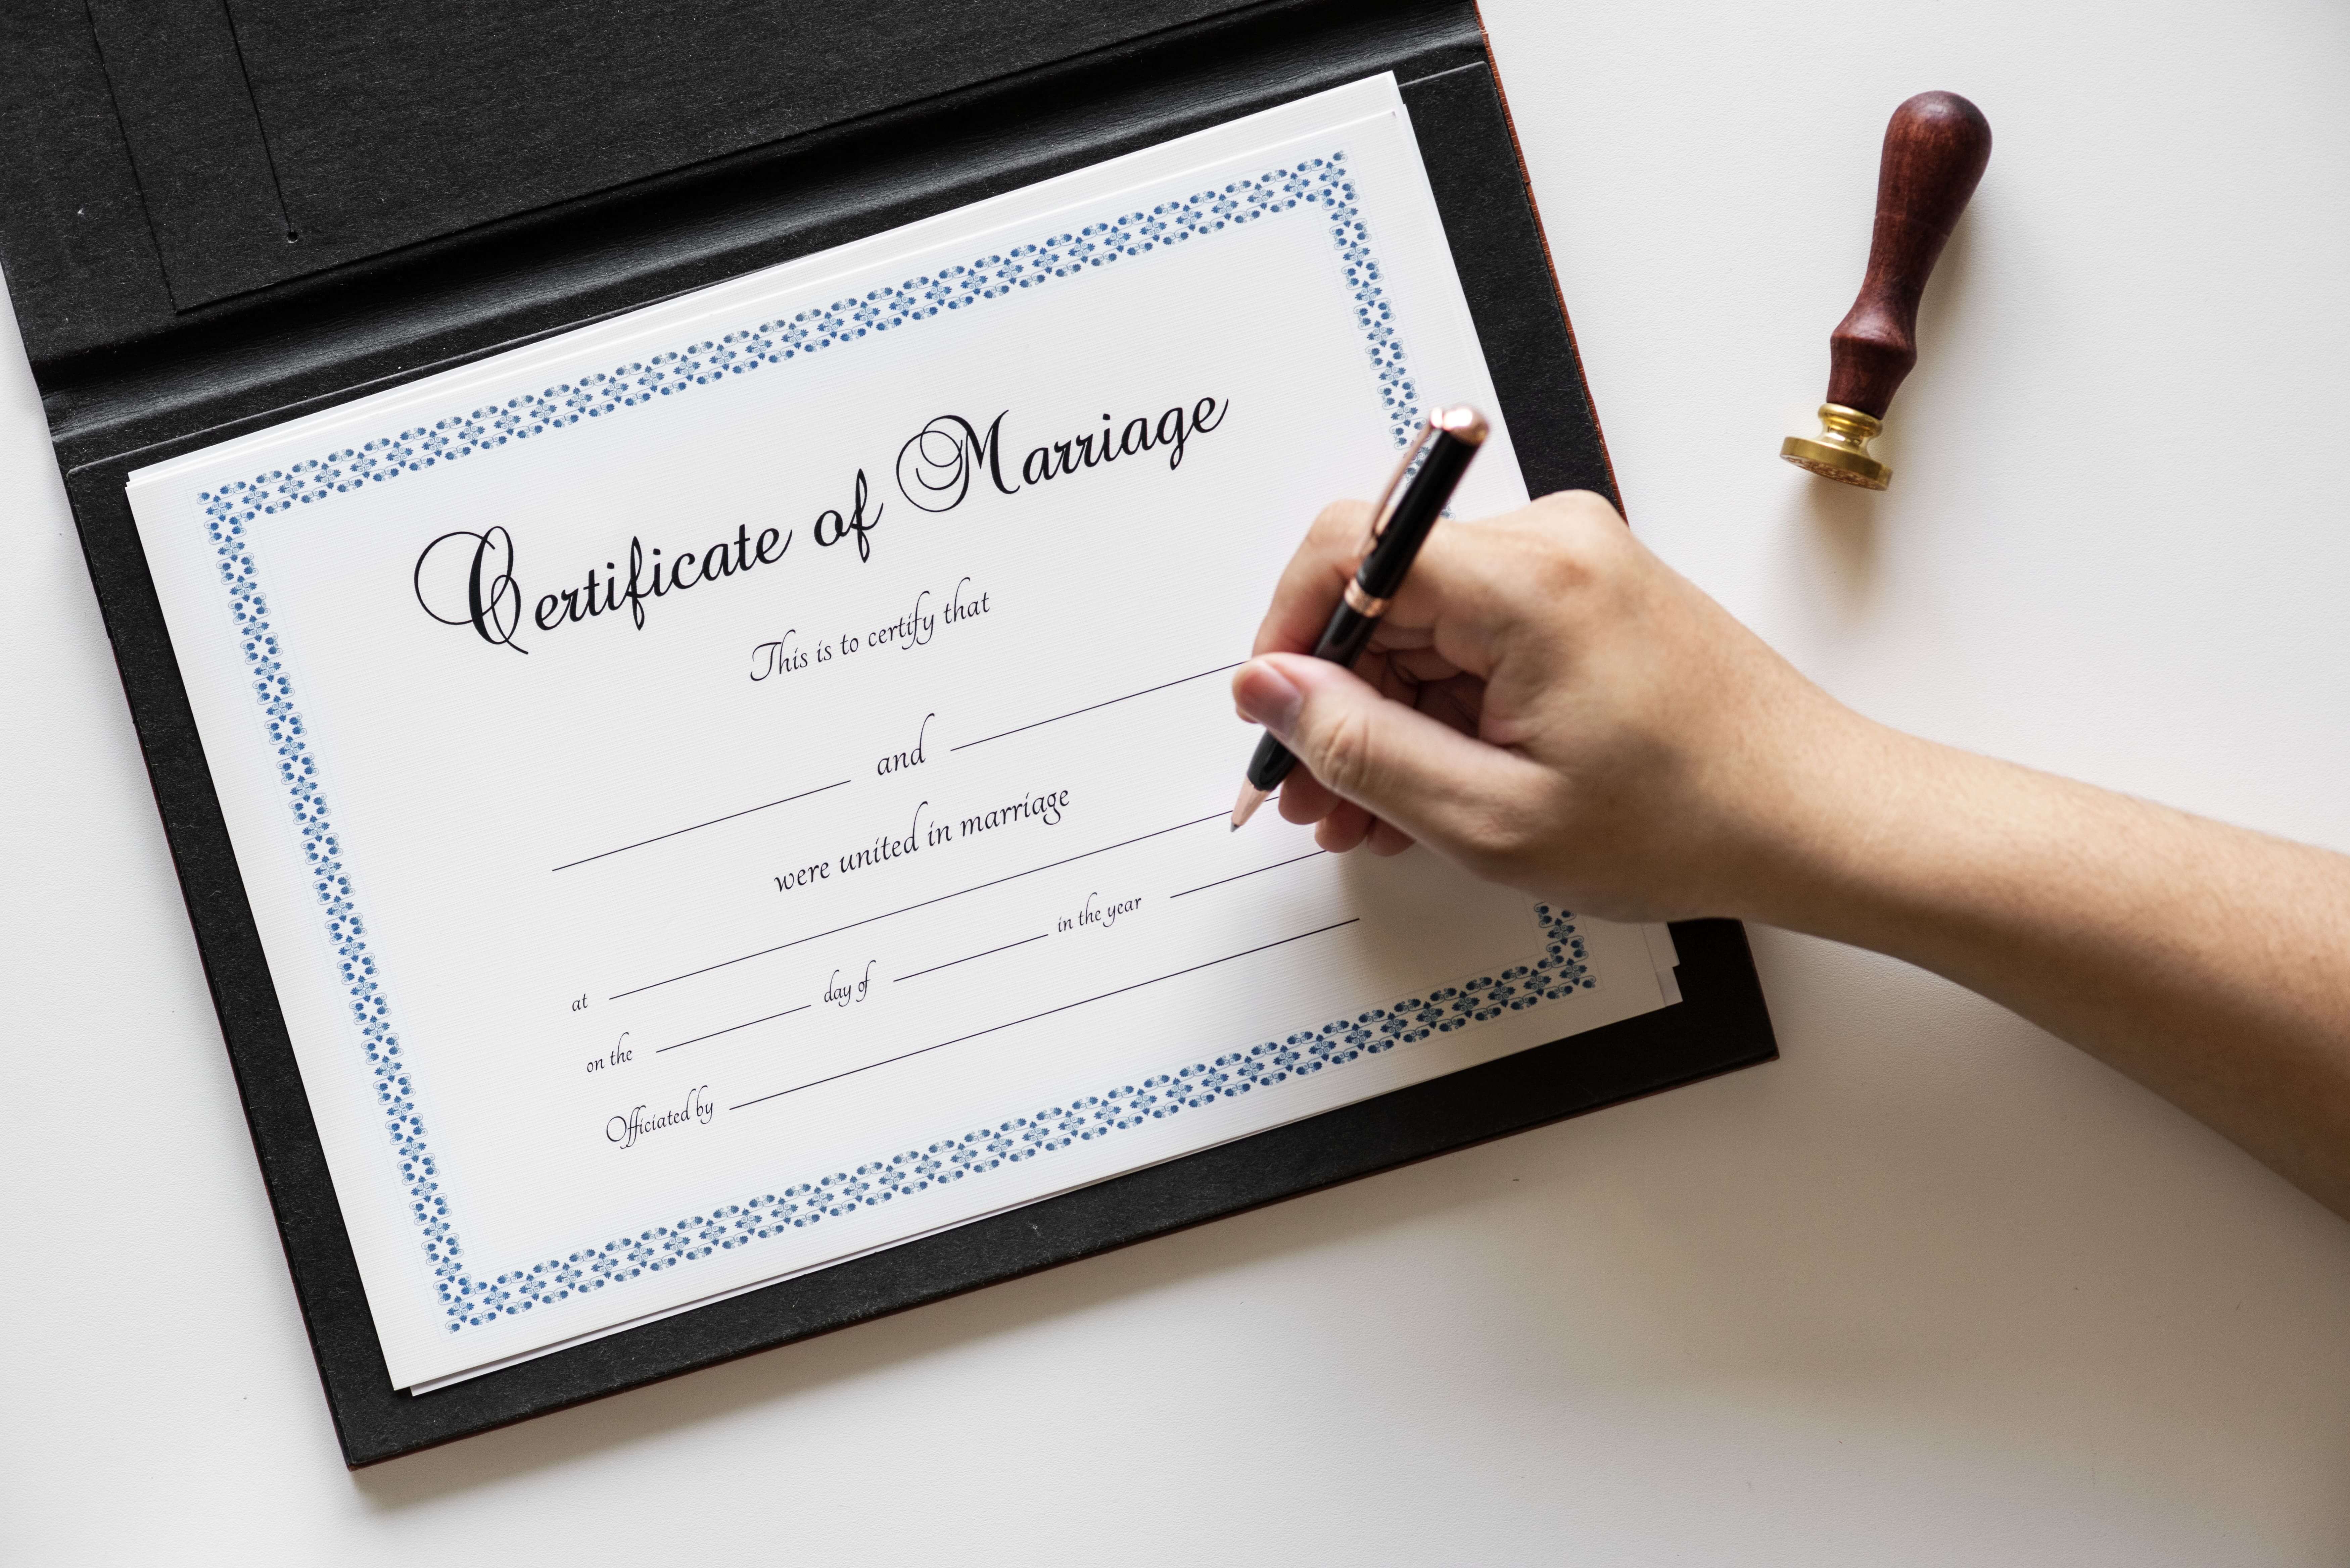 How to get a Marriage Certificate?